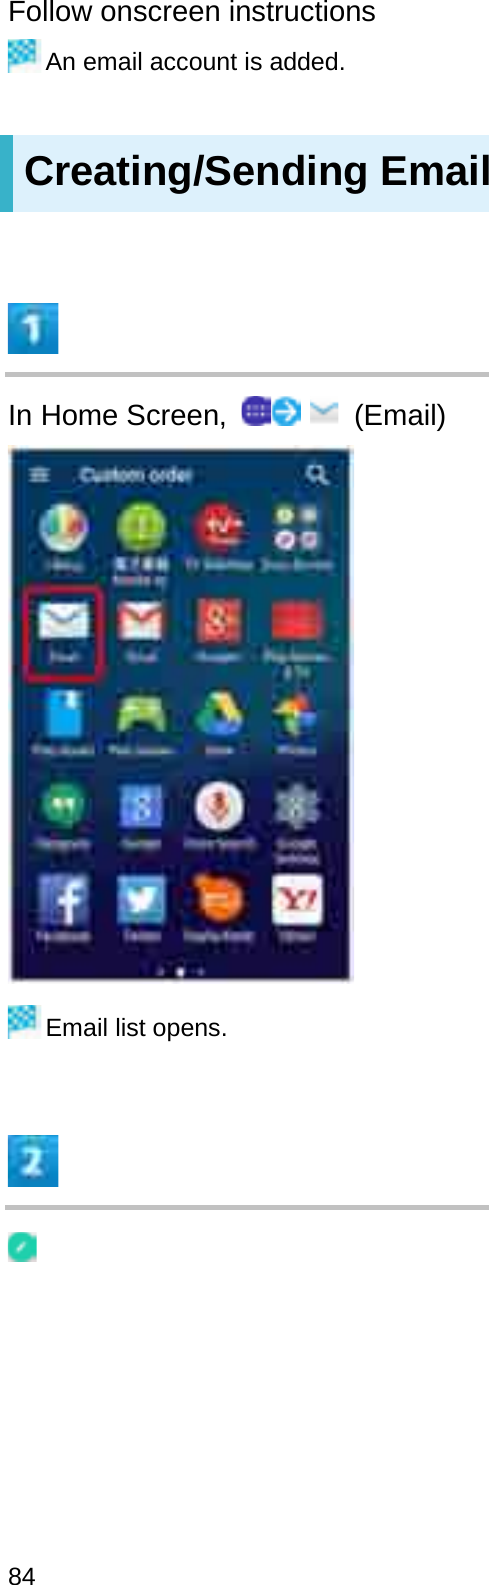 Follow onscreen instructionsAn email account is added.Creating/Sending EmailIn Home Screen,  (Email)Email list opens.84